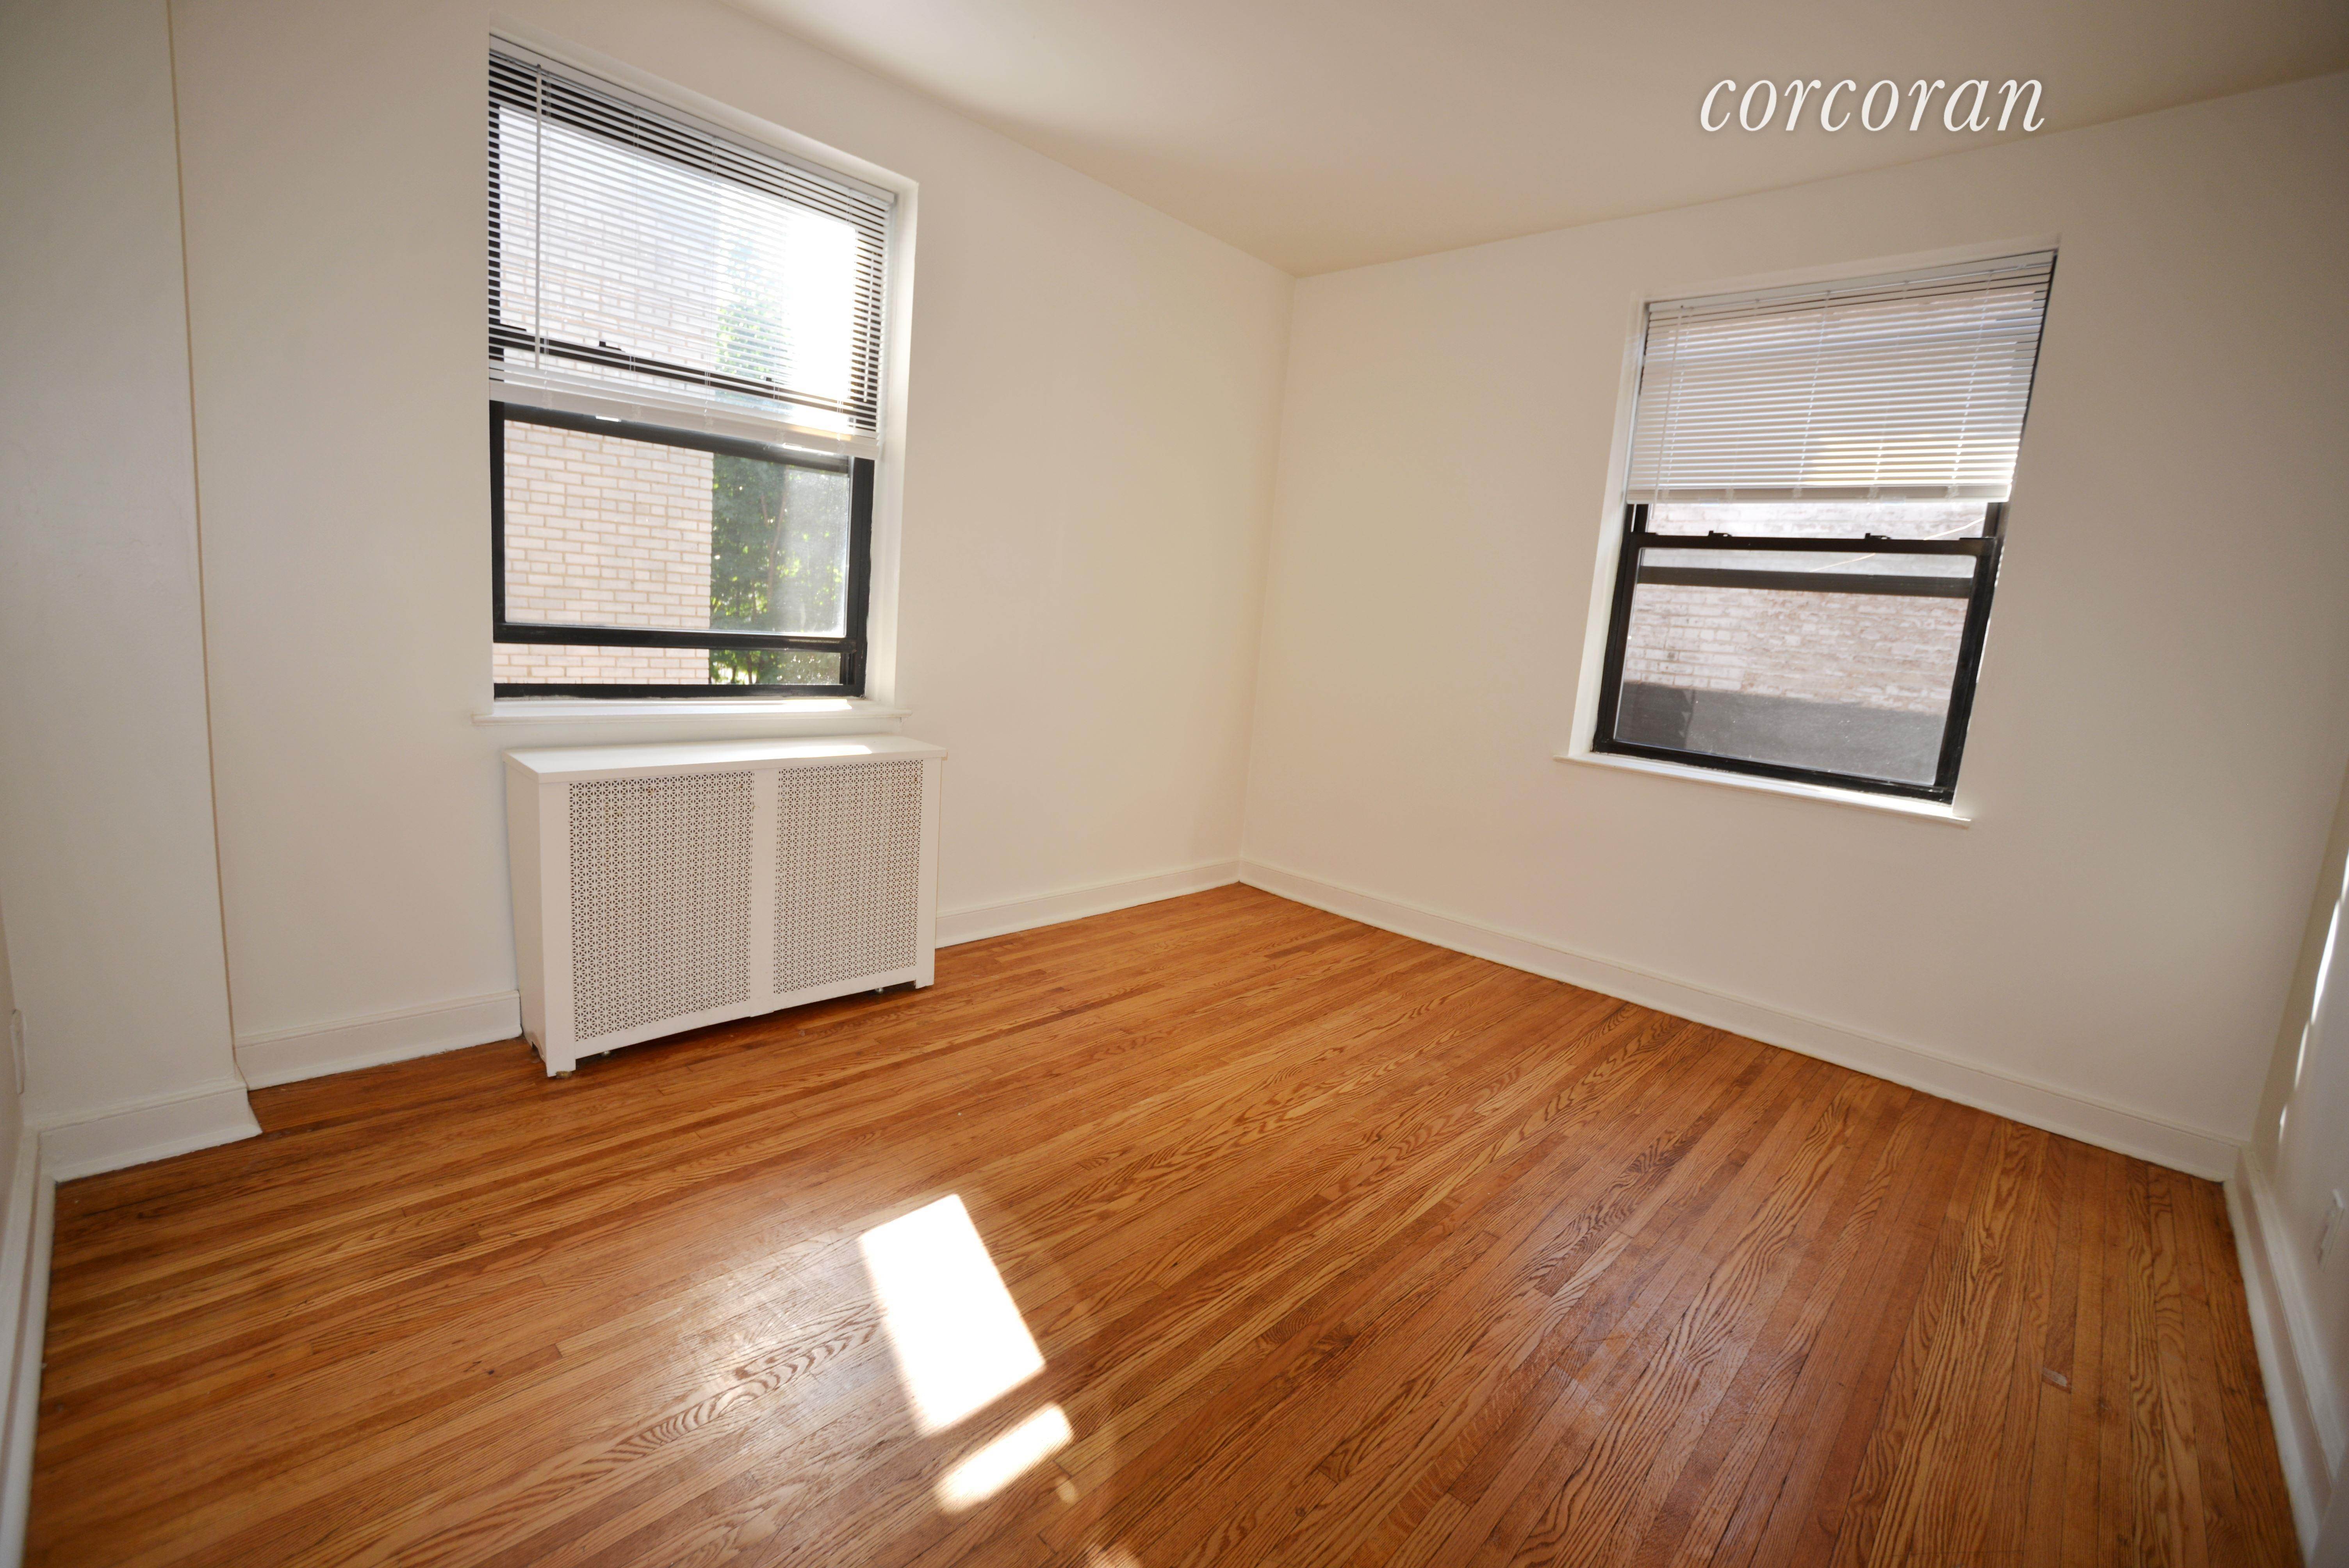 84-53 Dana Court, Middle Village, Queens, NY 11379에 건물